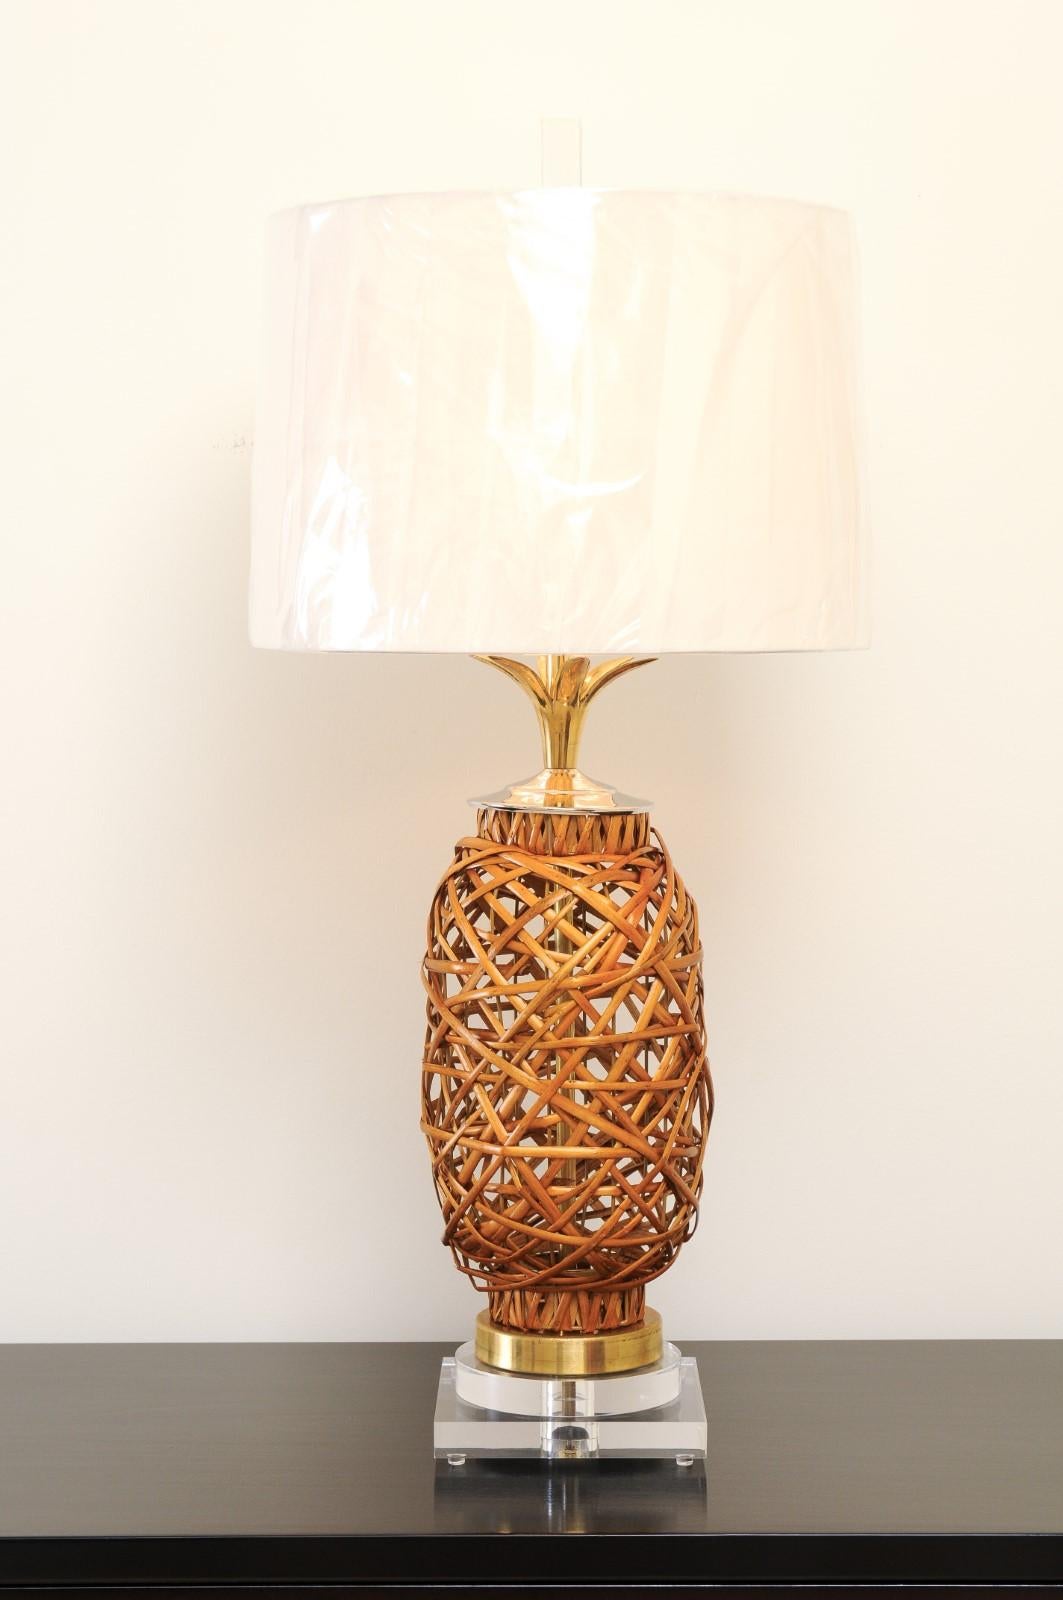 A stunning pair of restored rattan vessels, circa 1970, as newly built custom lamps. Lovely rattan form with accents in Lucite, brass and polished nickel. Exceptional craftsmanship and material selection. Functional dramatic jewelry that is both